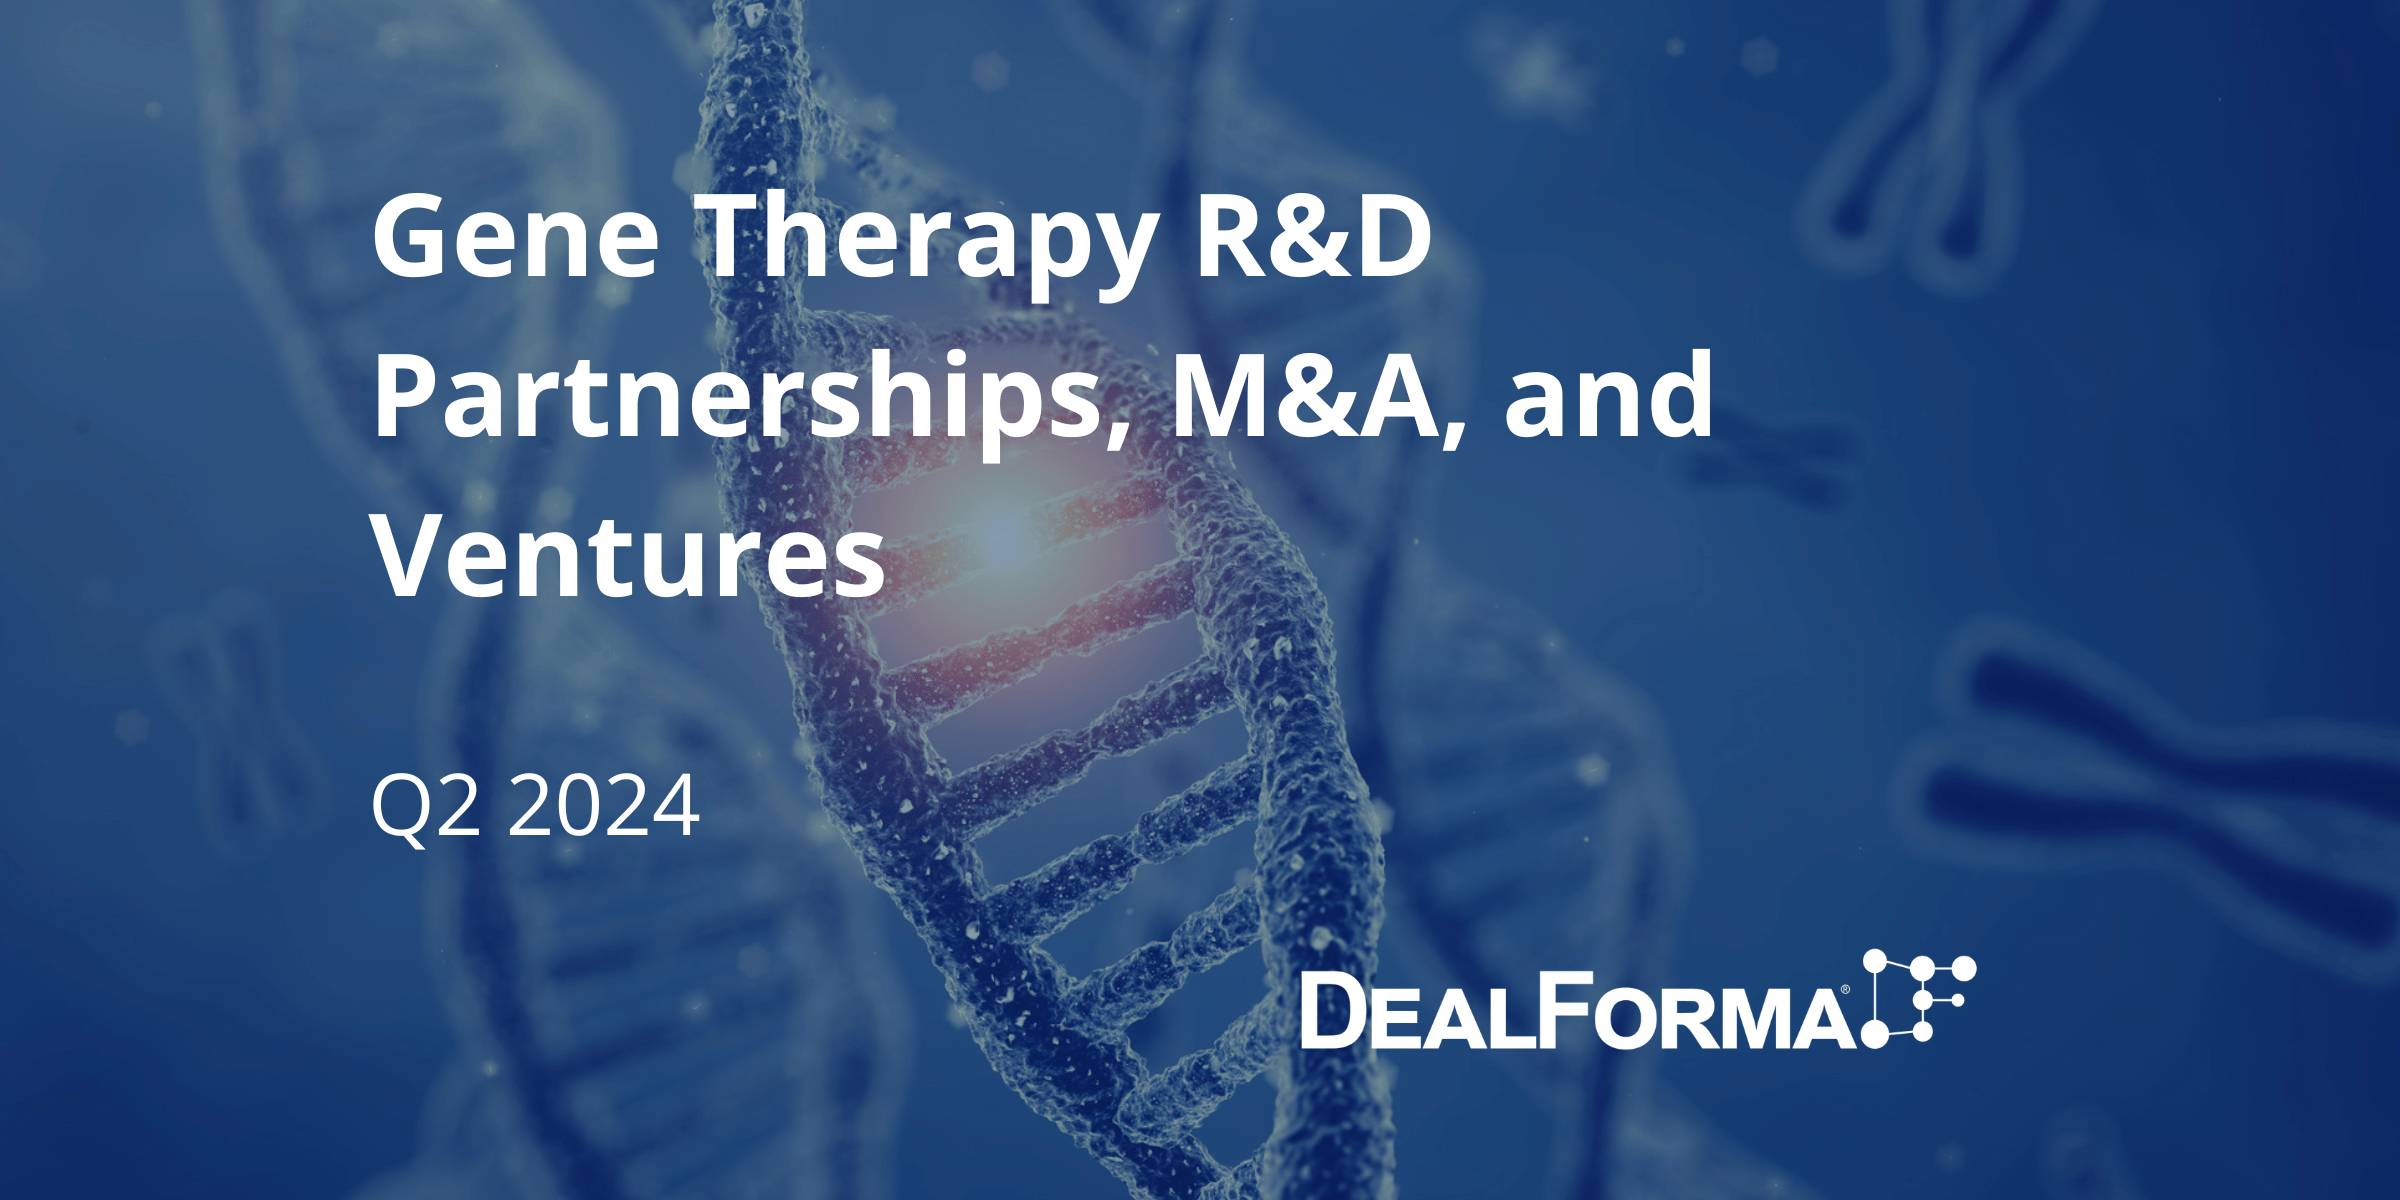 Gene Therapy R&D Partnerships, M&A, and Ventures